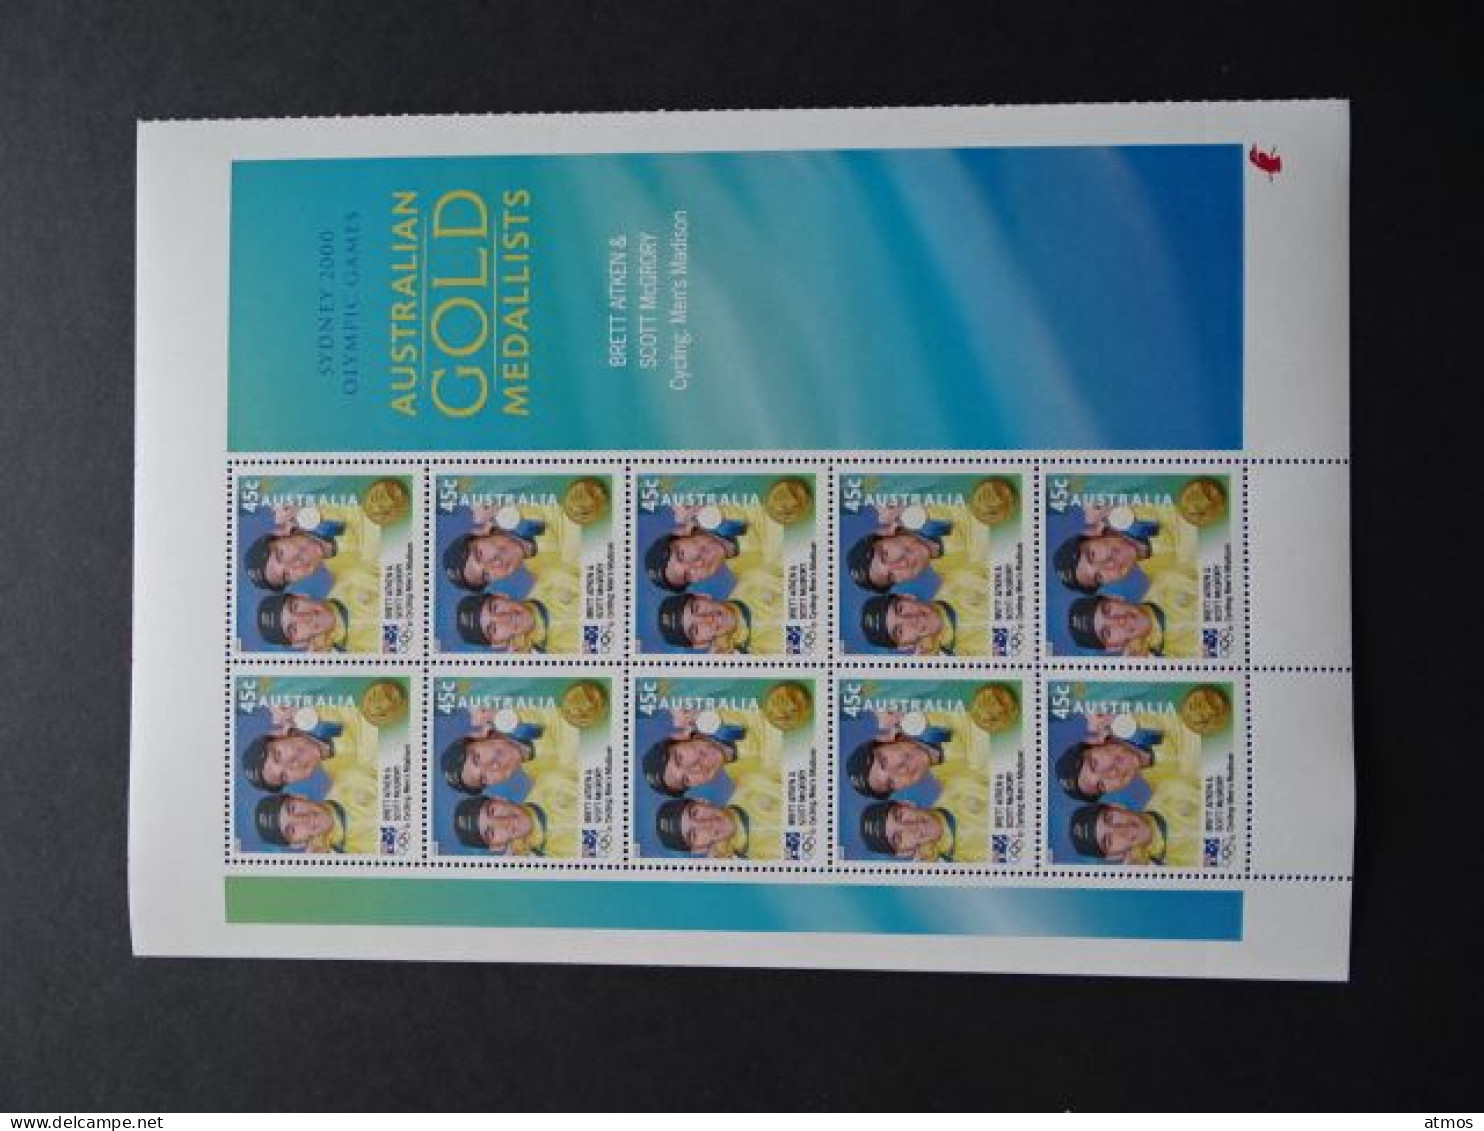 Australia MNH Michel Nr 1980 Sheet Of 10 From 2000 ACT - Mint Stamps